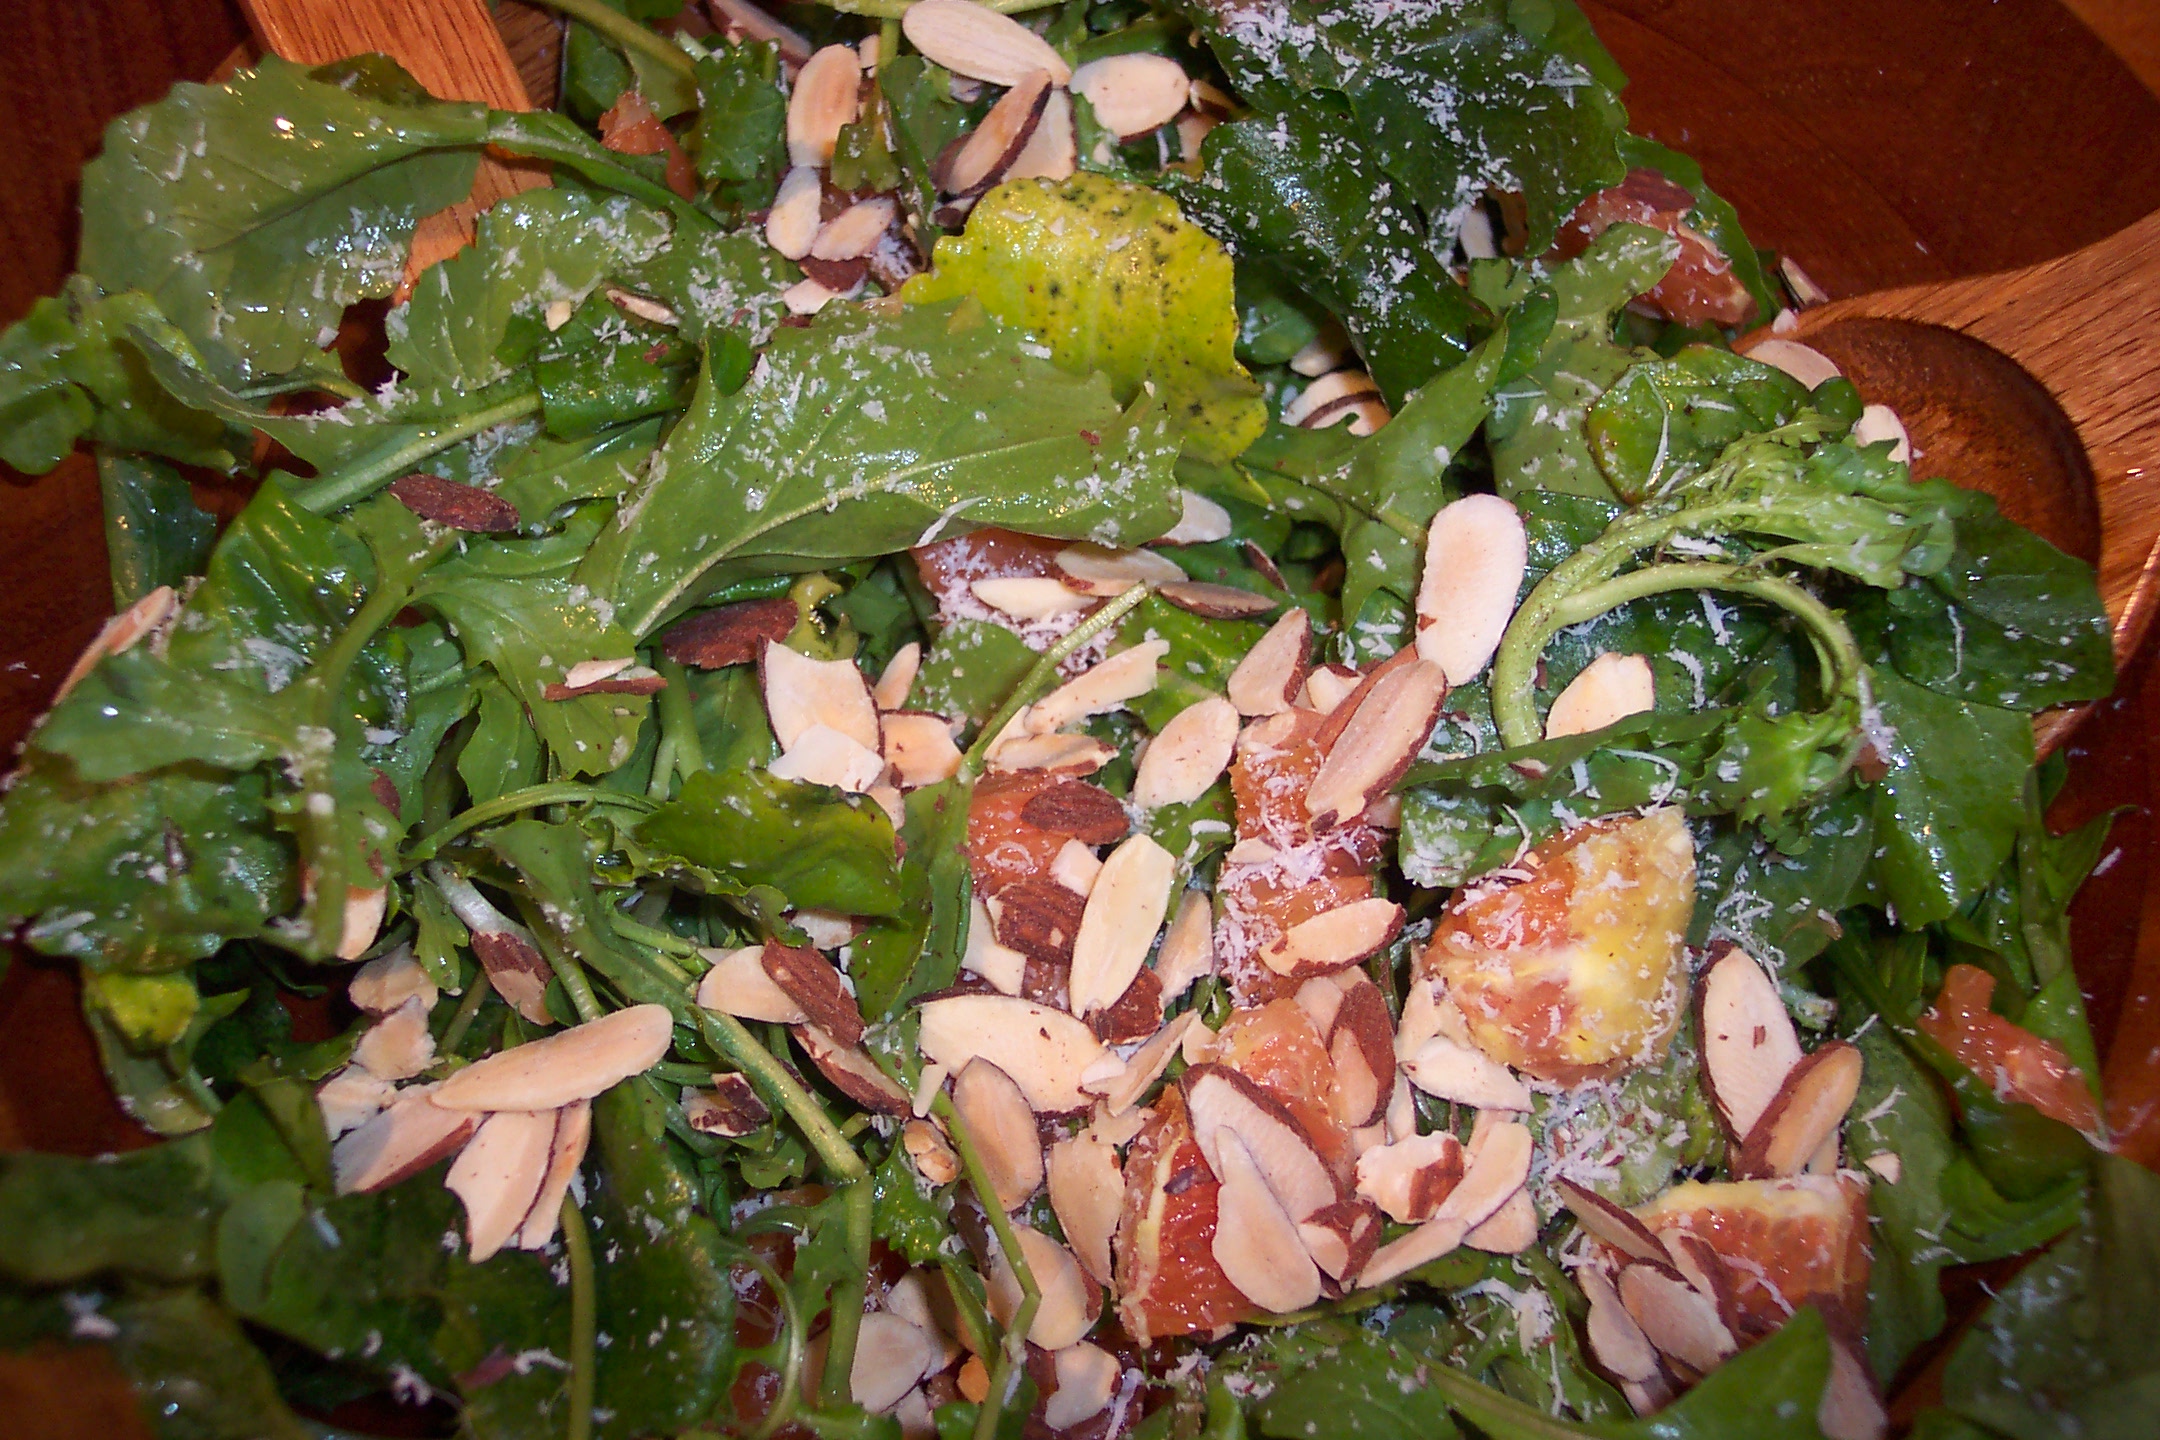 the salad has lettuce, spinach, almonds and cheese